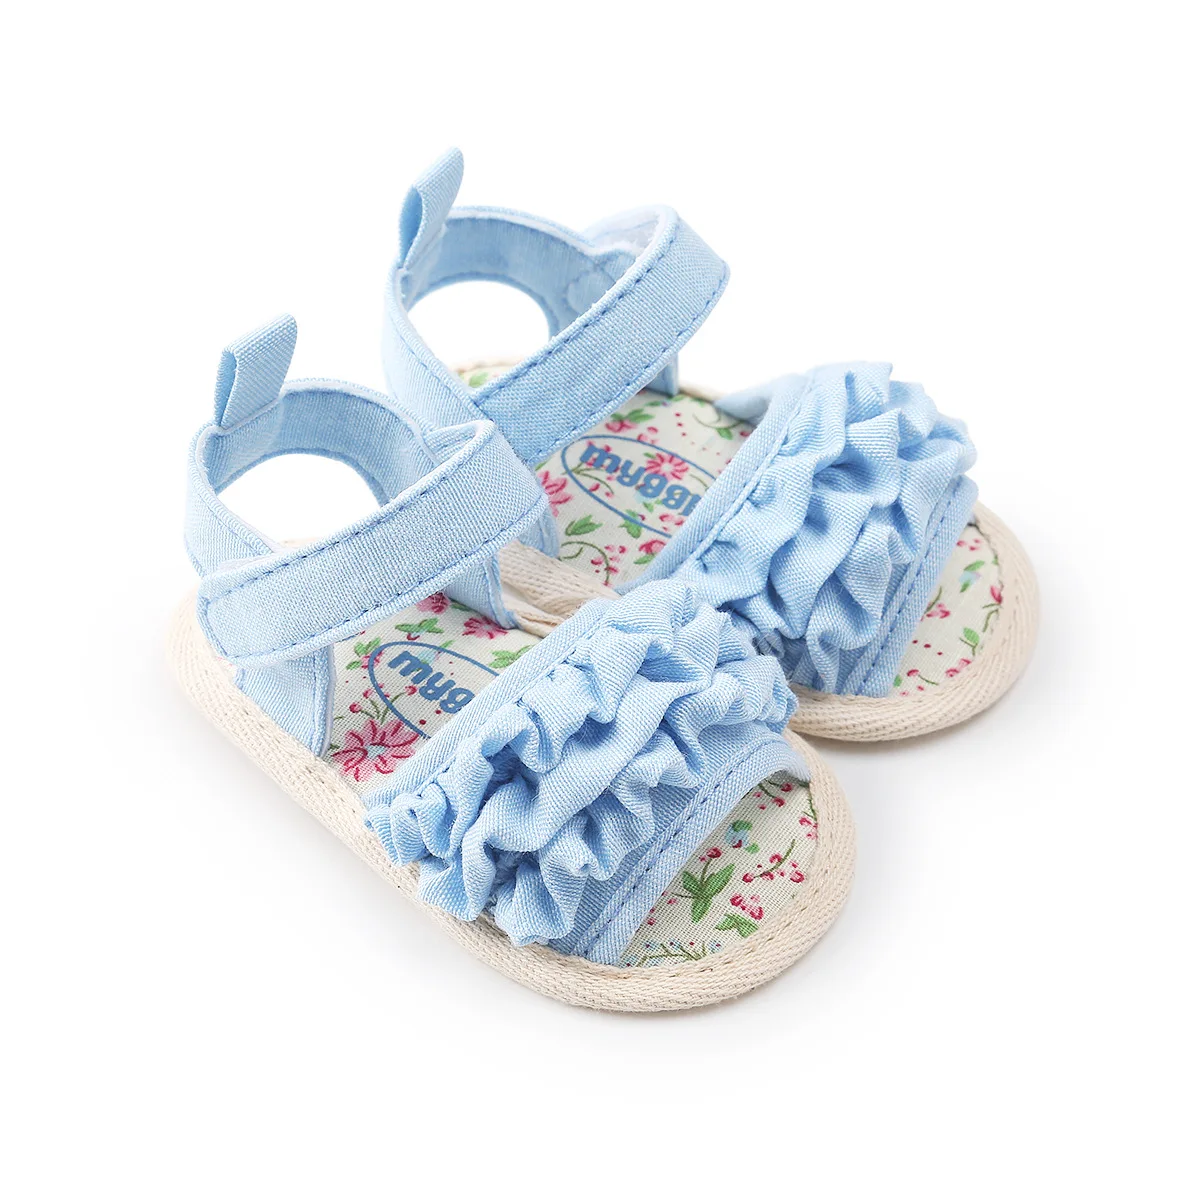 

Baby Girl Sandals Summer Baby Girl Shoes Cotton Baby Girl Flower Sandals Newborn Baby Shoes Soft Sole Playtoday Beach Sandals